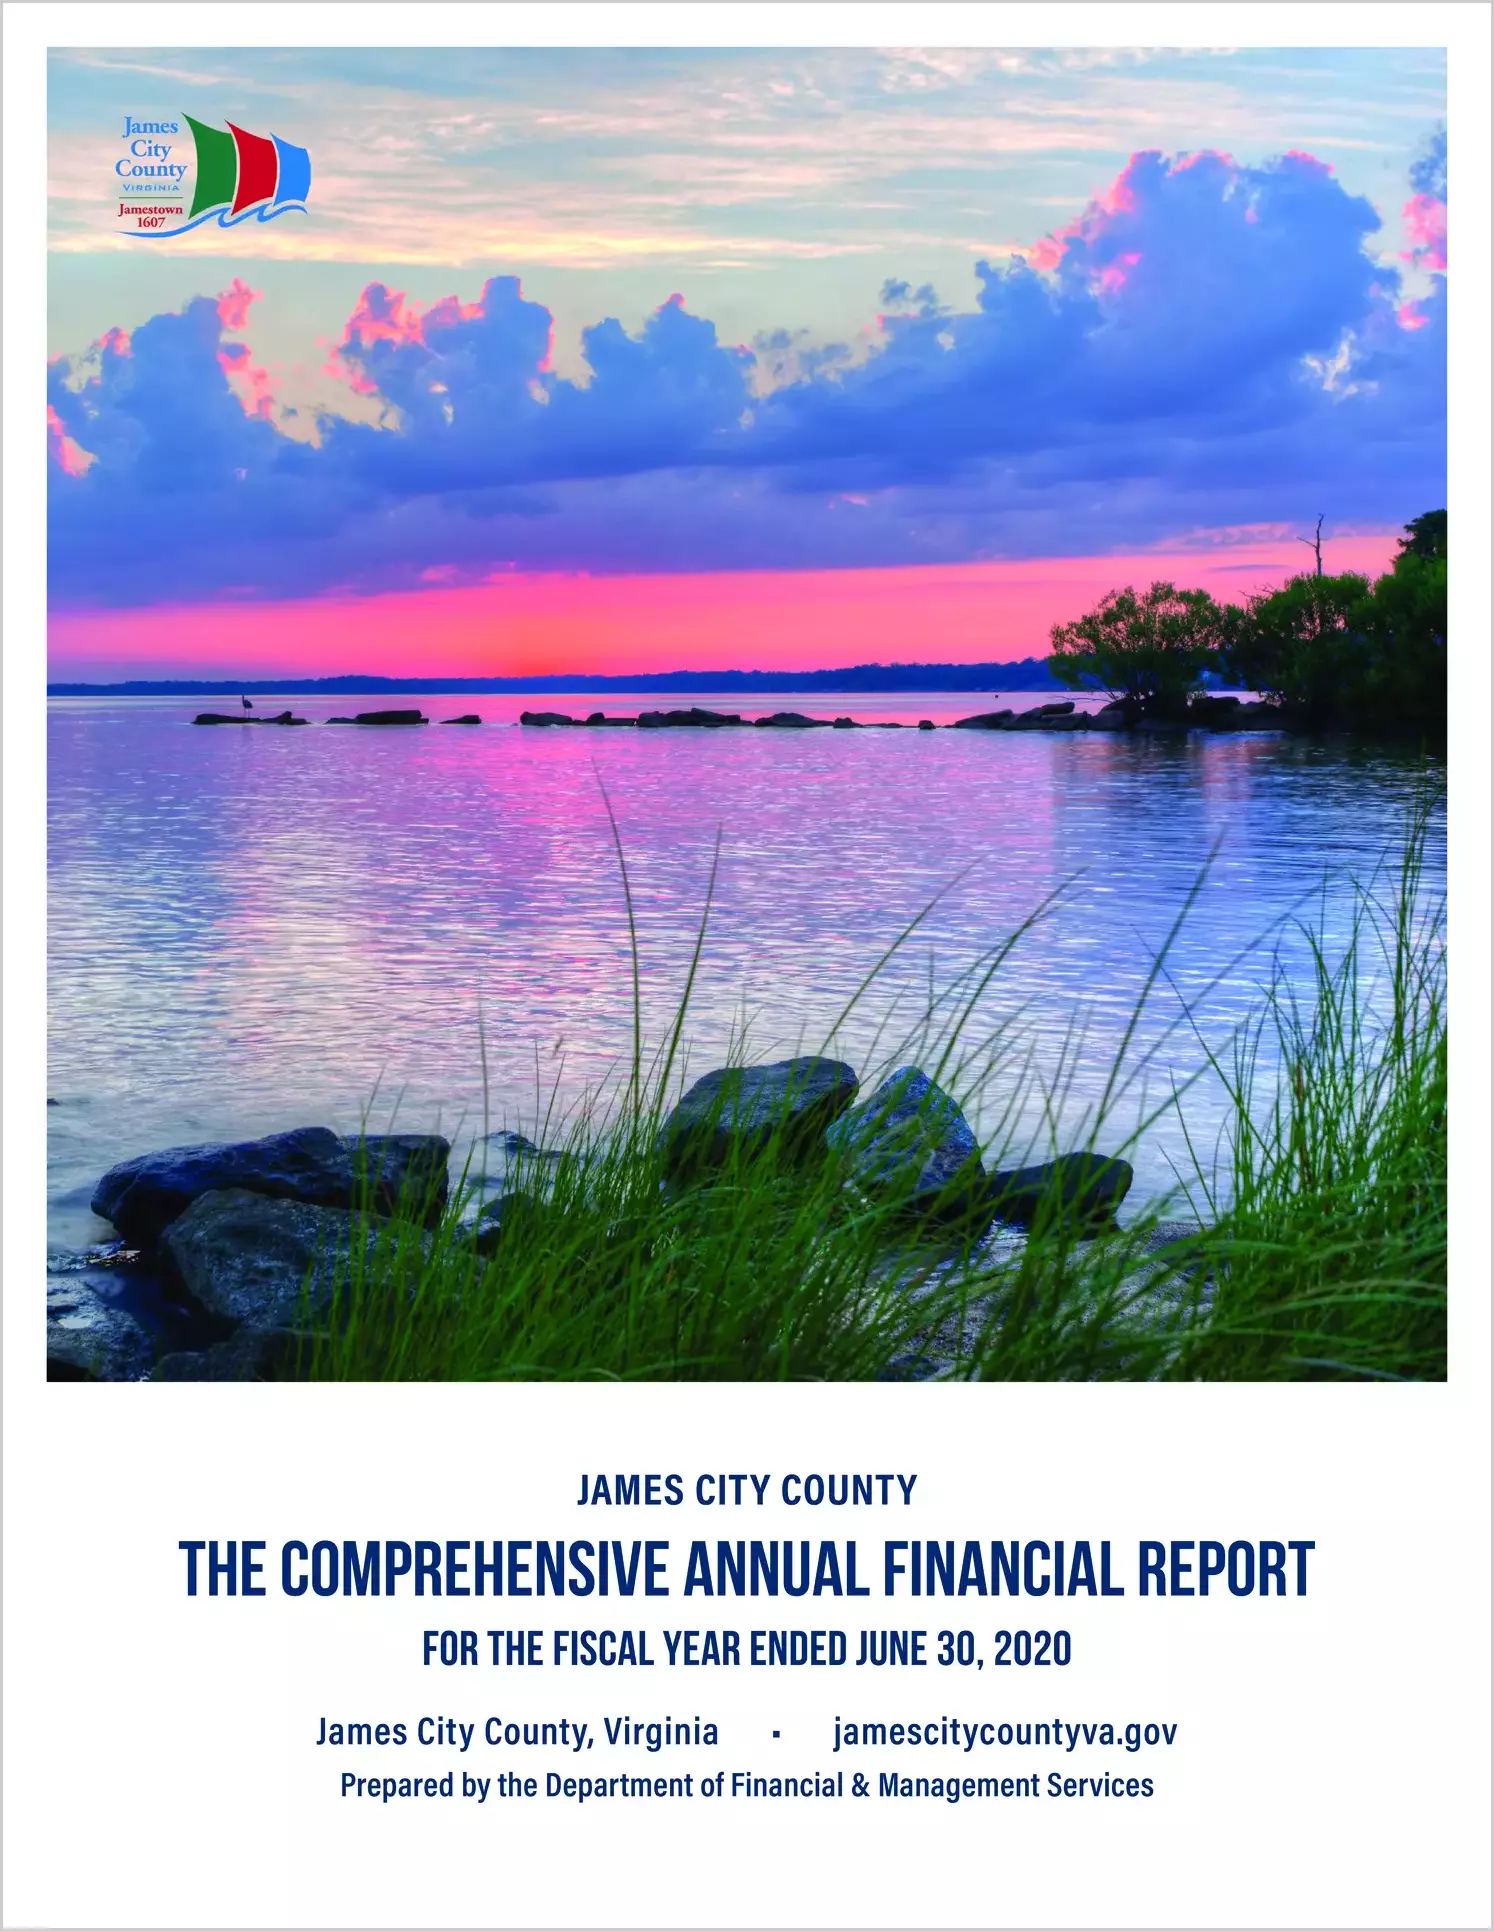 2020 Annual Financial Report for County of James City